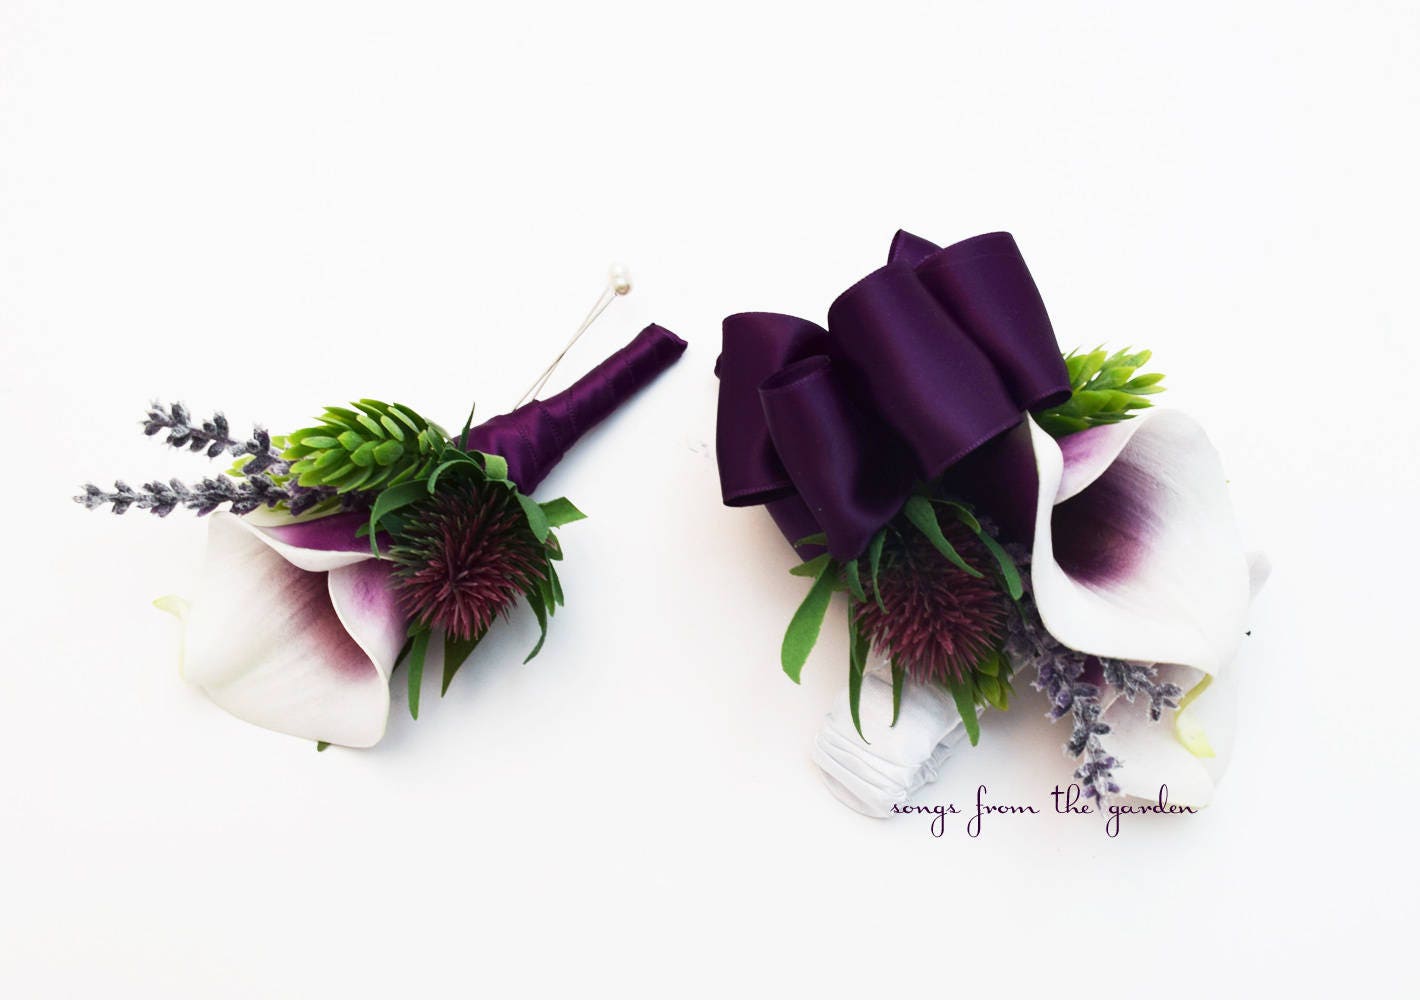 Picasso Calla and Thistle Boutonniere or Corsage - Hops and Lavender Accents Groom Groomsmen Boutonnieres - Wedding Prom Homecoming Corsage